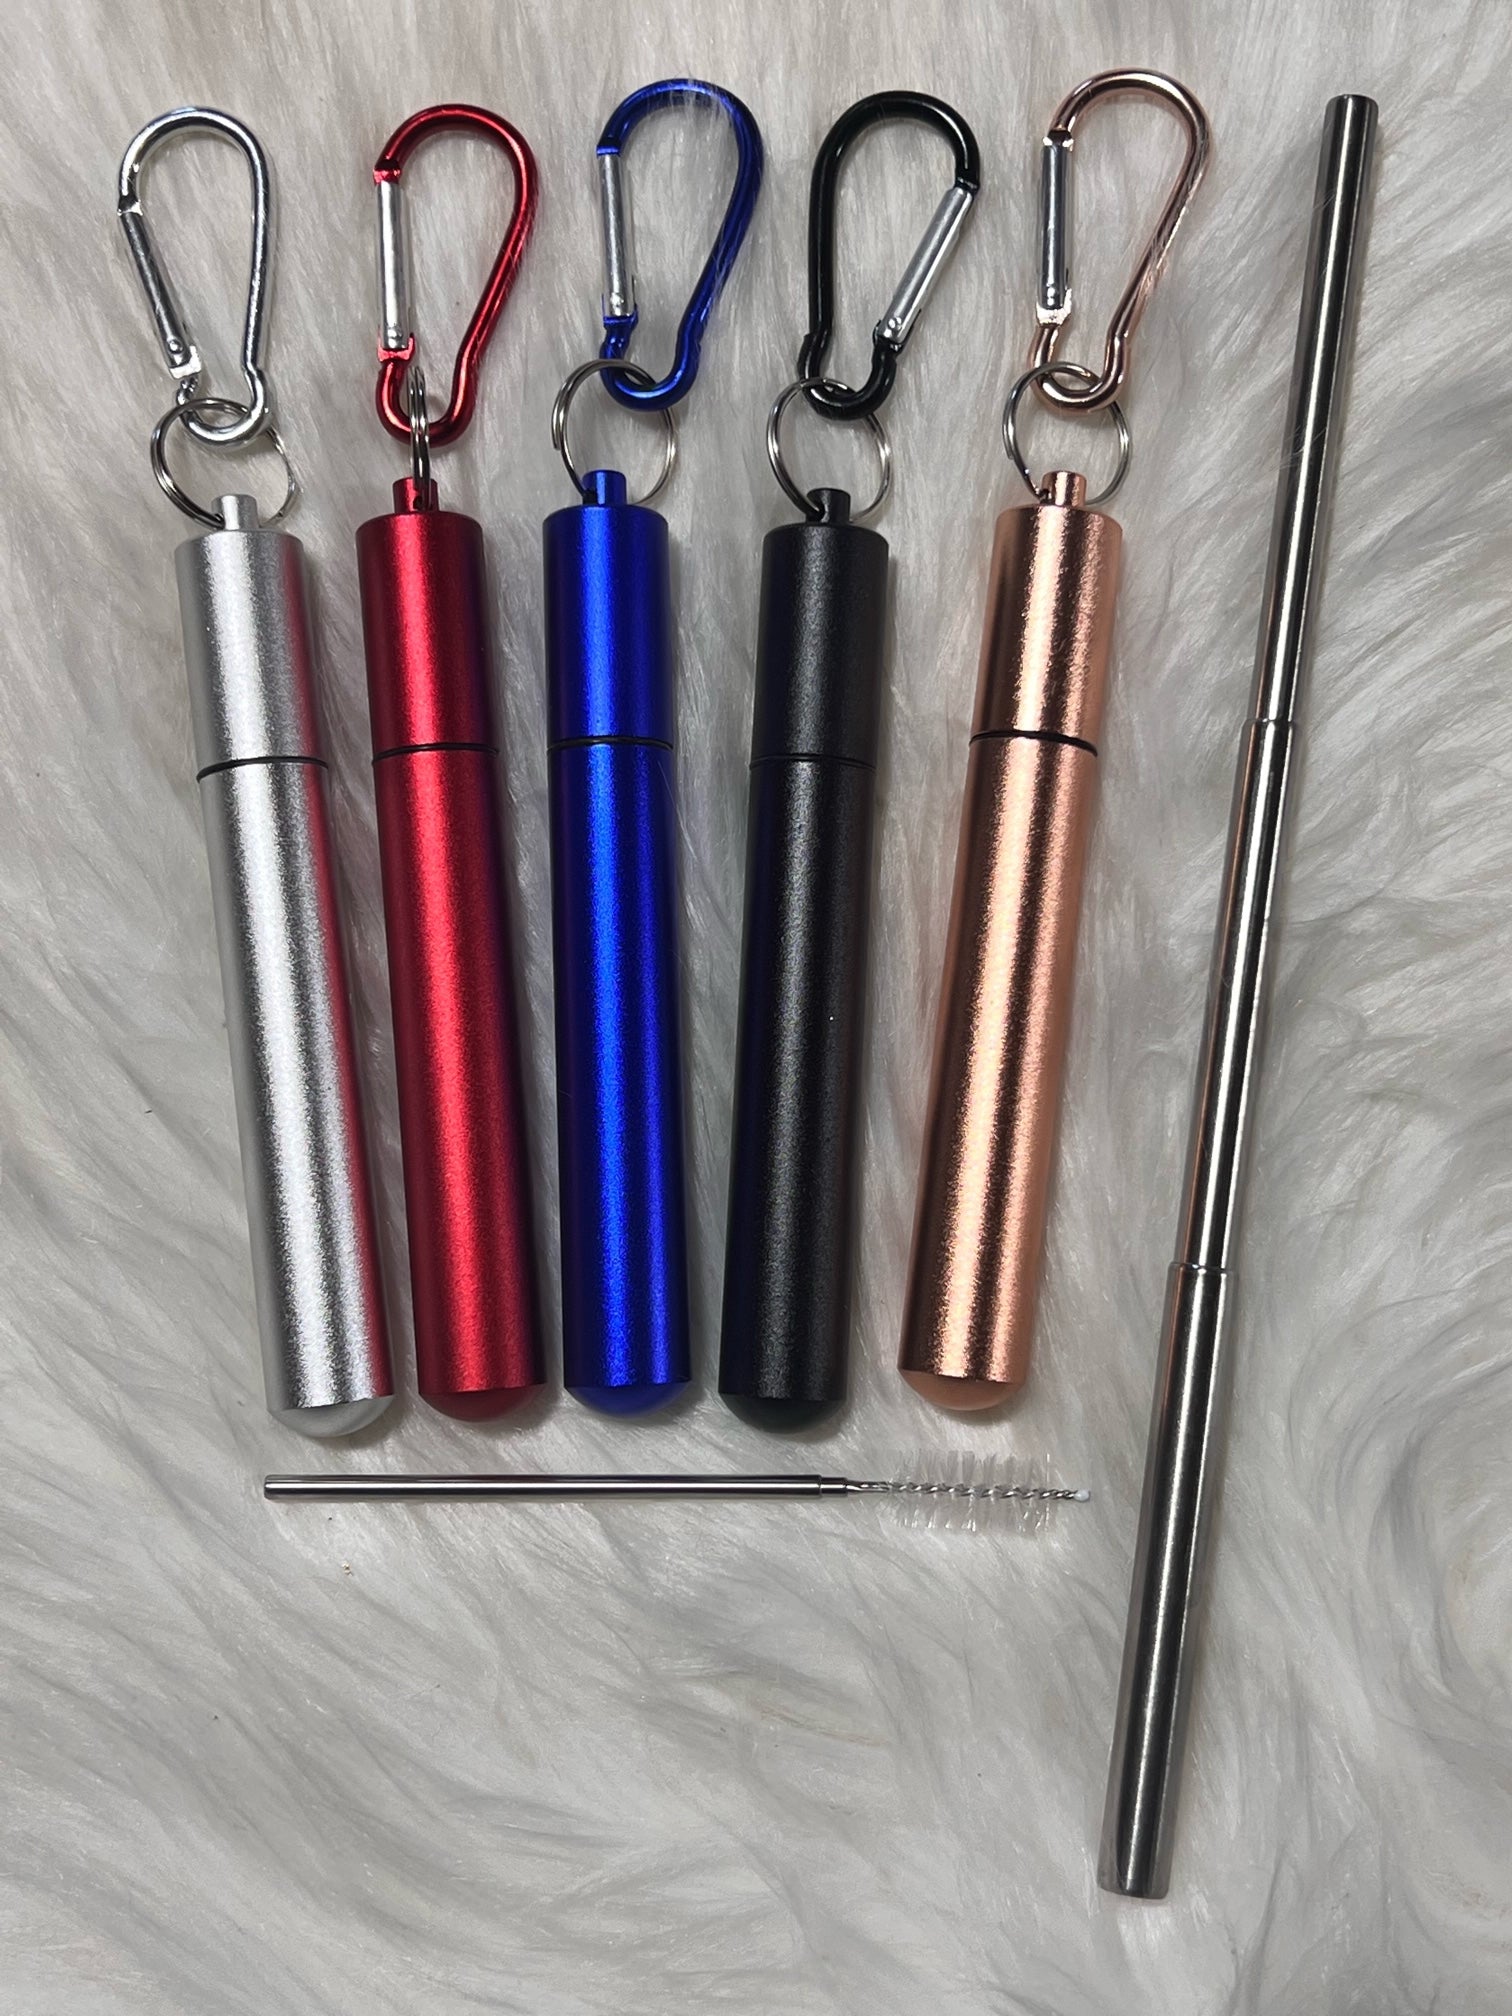 Collapsible Metal Straw